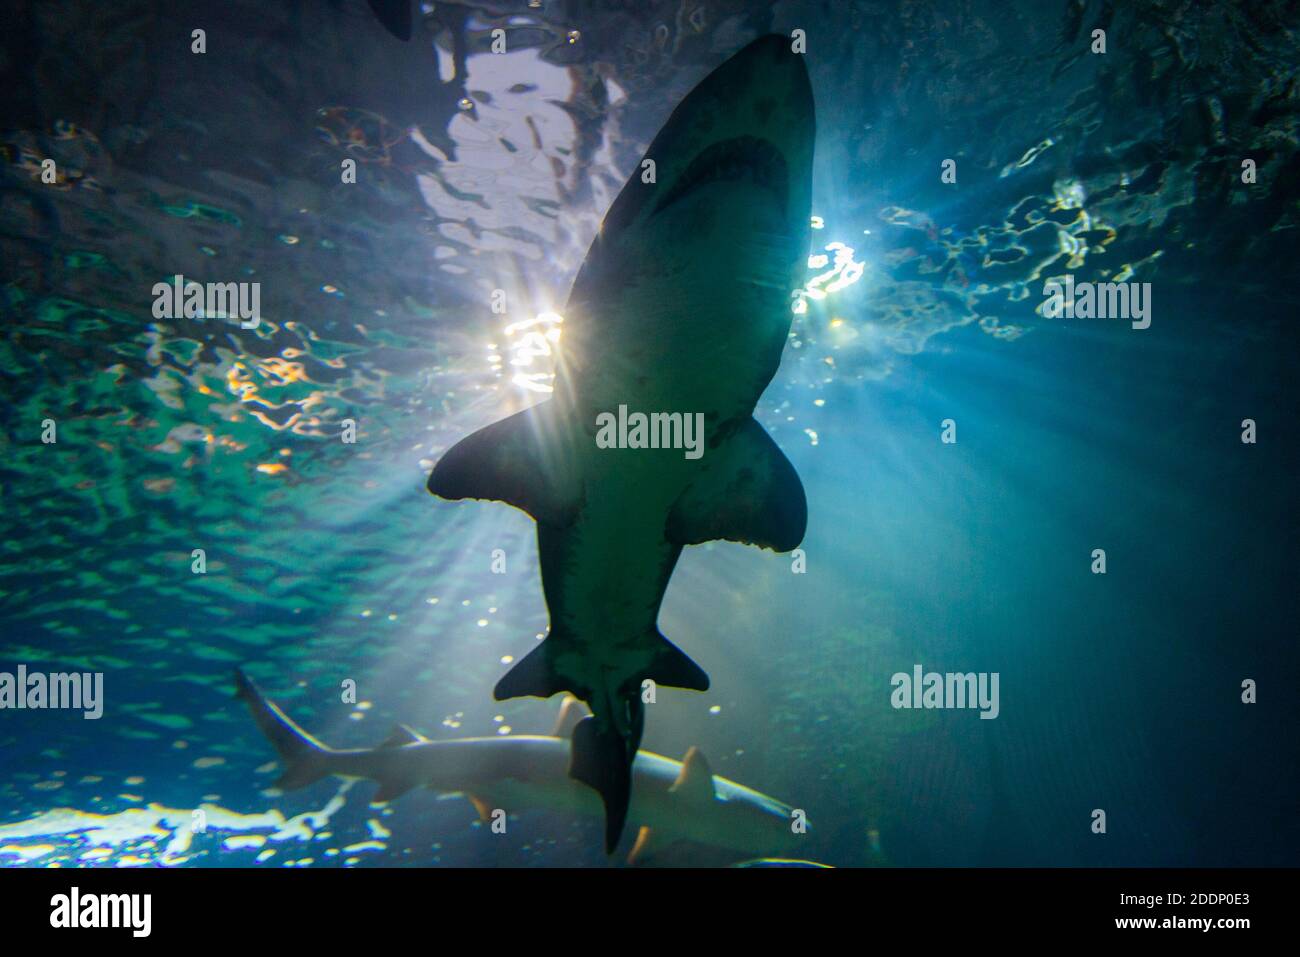 Sharks silhouetted against blue sunlight in aquarium like as deep water. Stock Photo